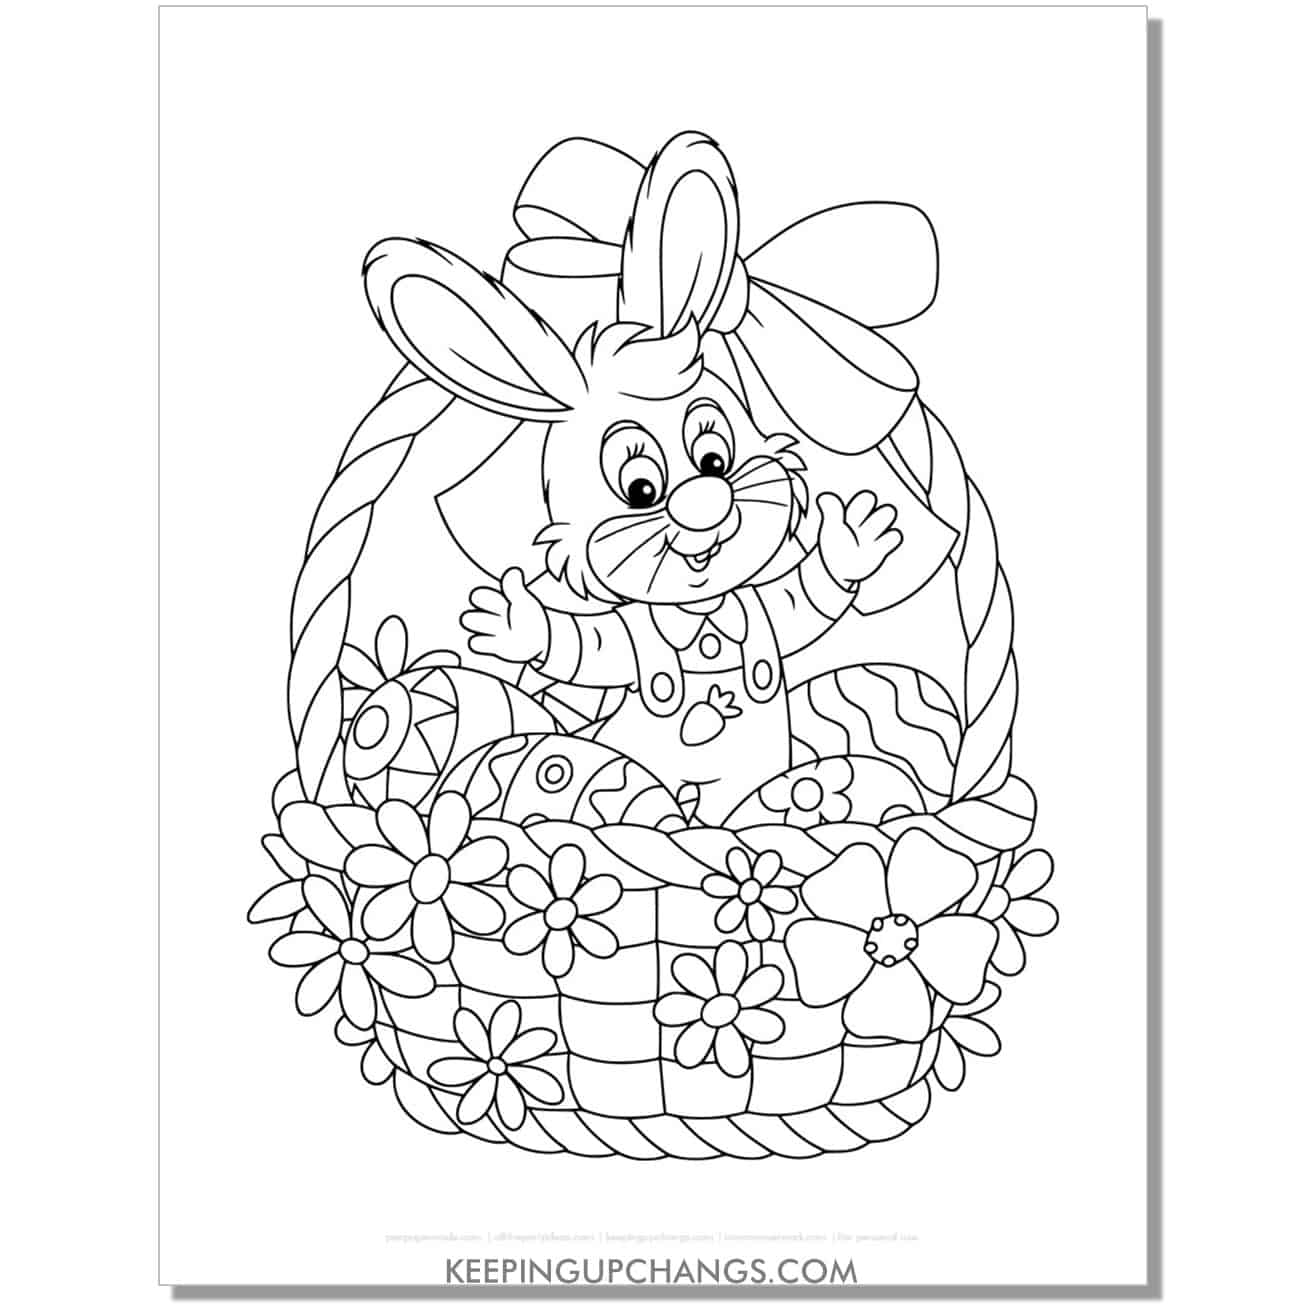 easter bunny in overalls in basket of eggs coloring page, sheet.